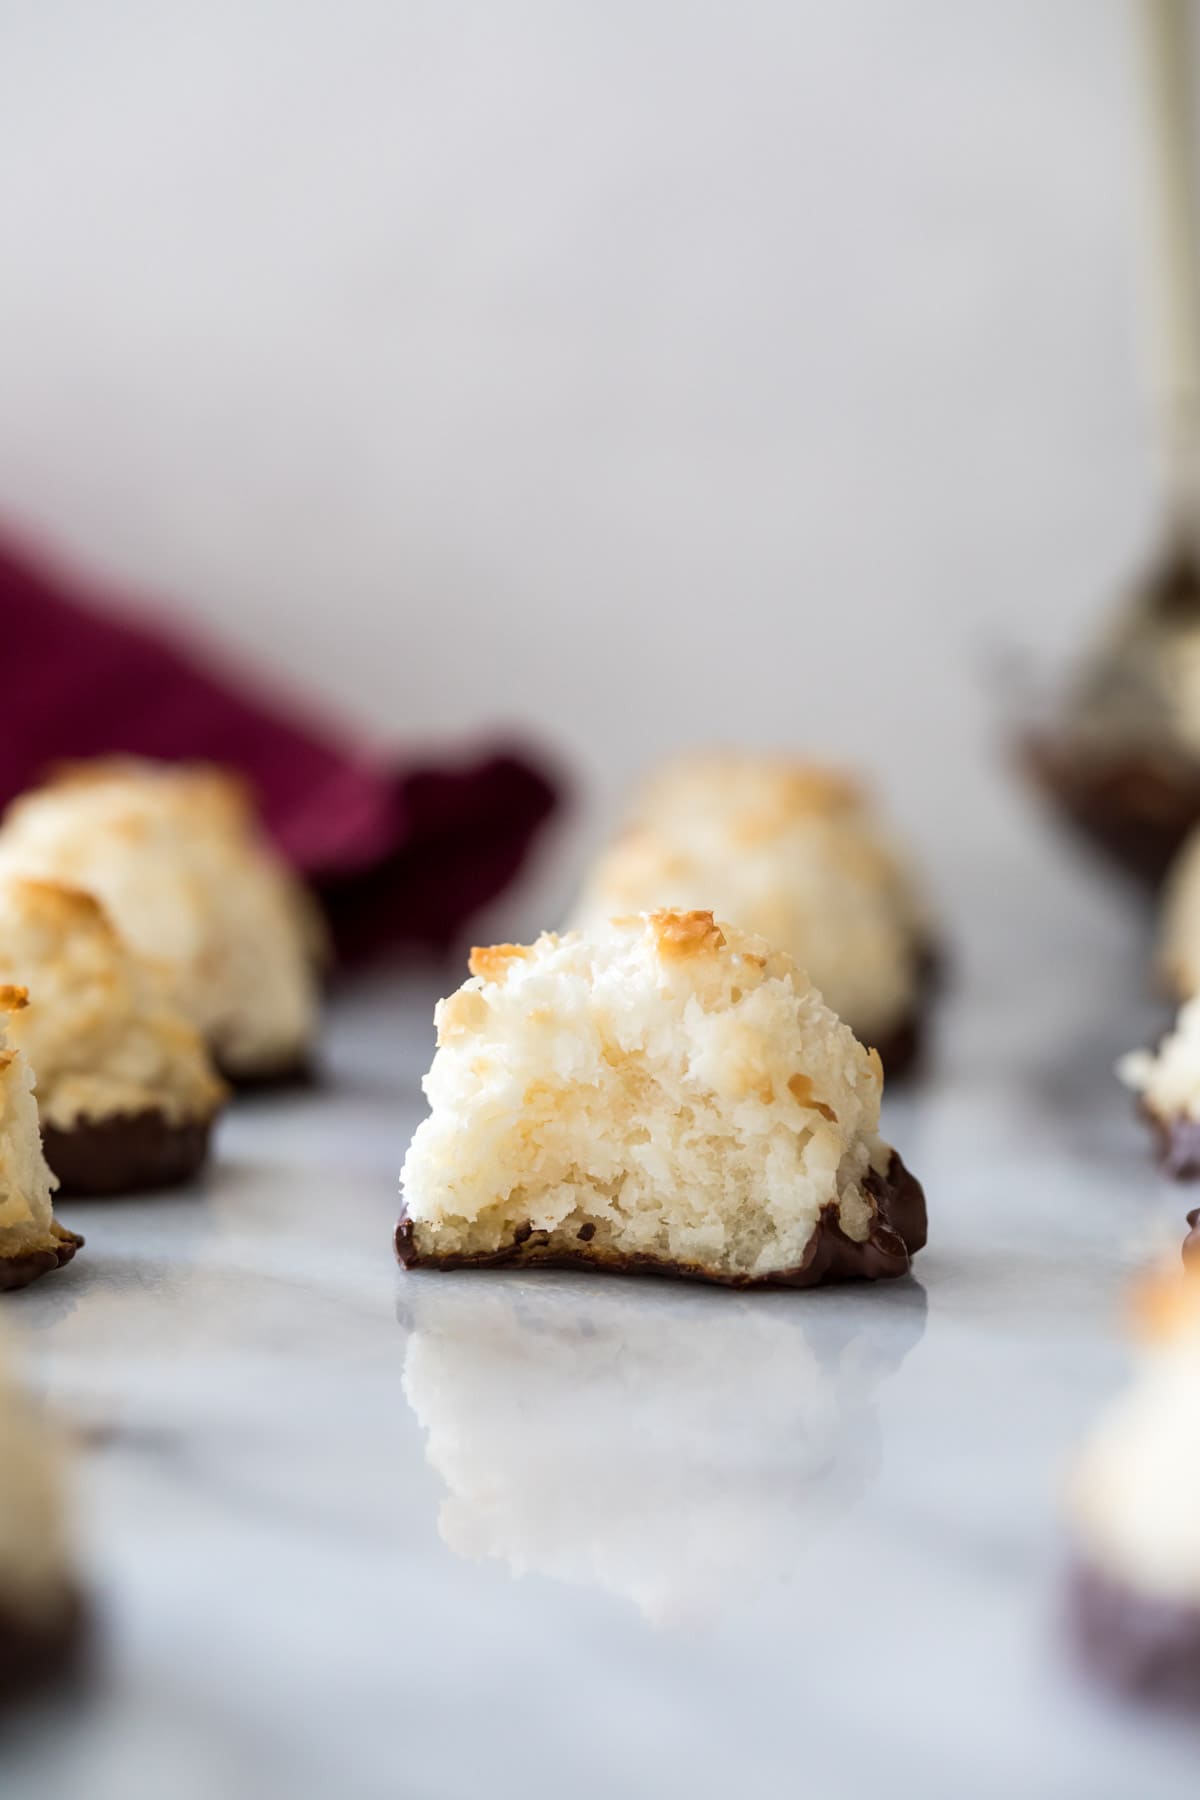 chocolate dipped coconut macaroon missing one bite